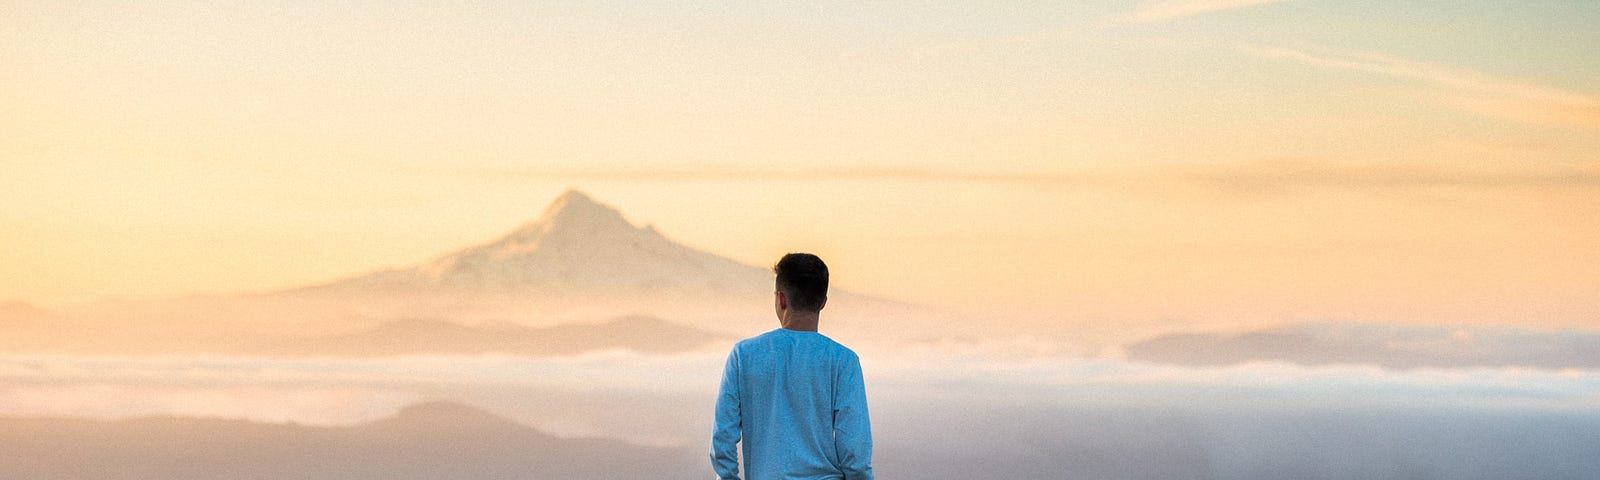 A person standing on a mountain at sunset.